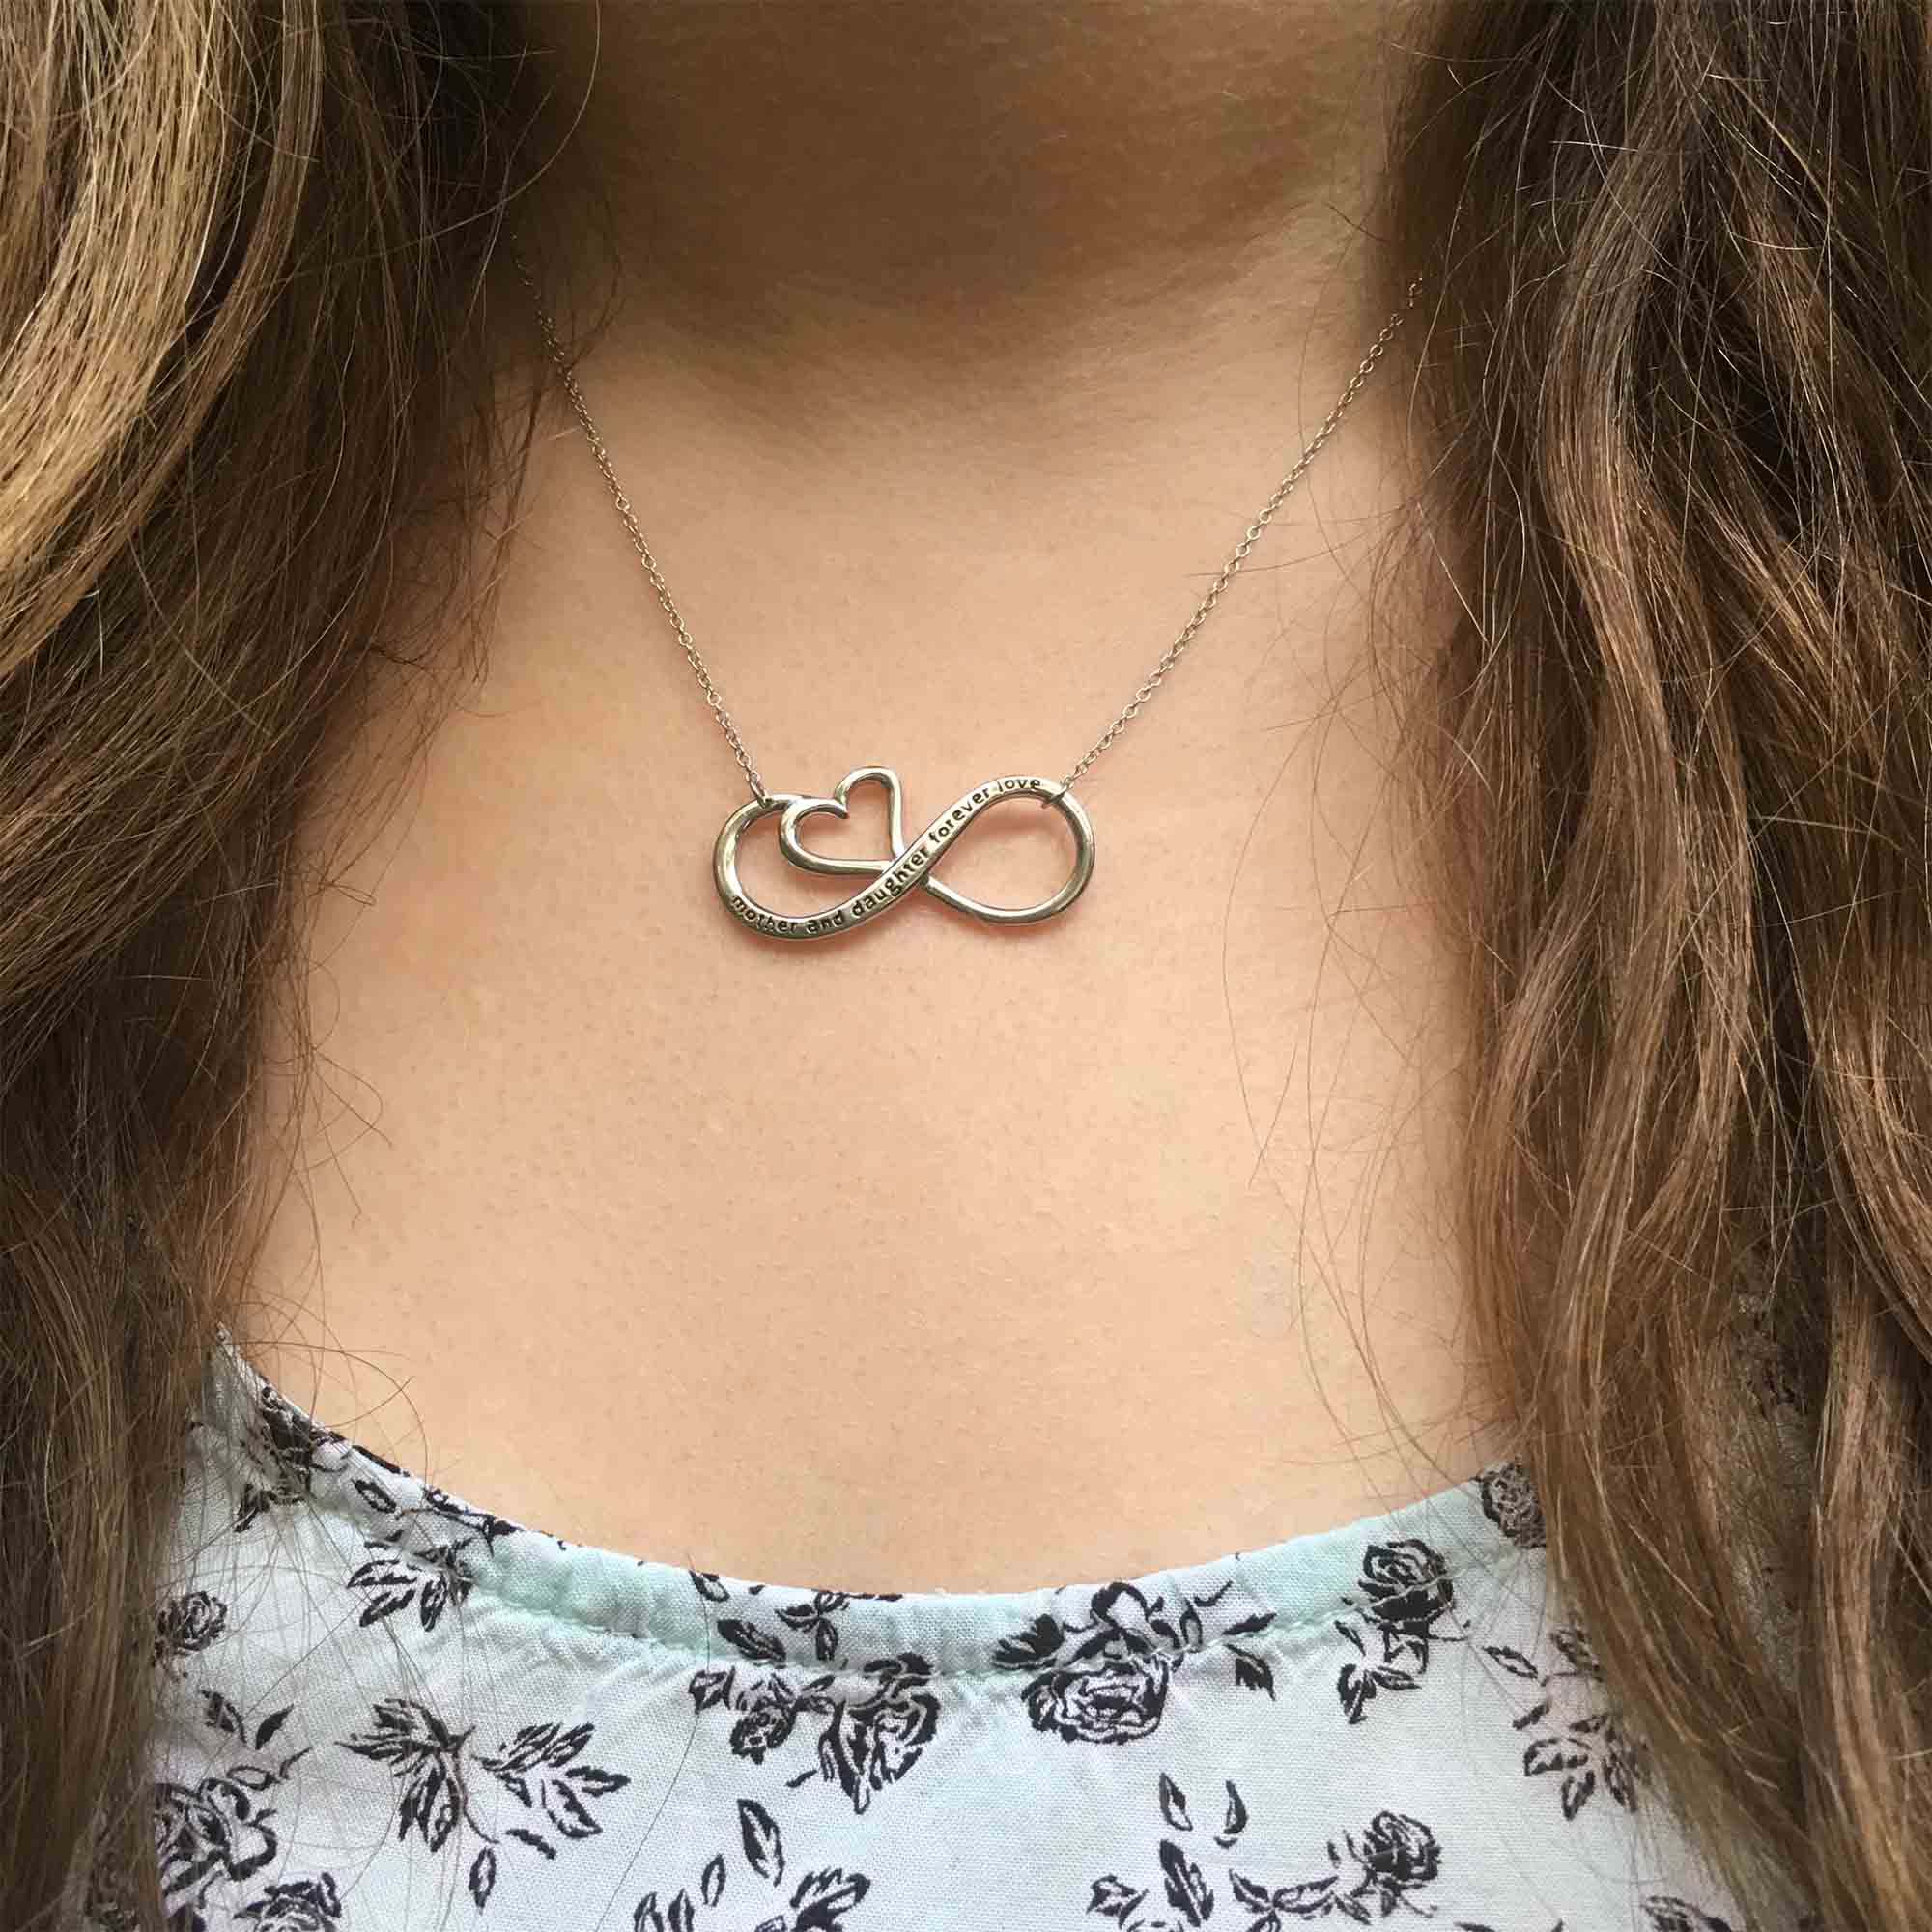 Infinity Heart Necklace Sterling Silver to Symbolize Eternal Endless Love  for Self, Sister, Best Friend, Daughter, Mom, Wife or Girlfriend - Etsy |  Mother daughter necklaces set, Sterling silver heart necklace, Daughter  necklace